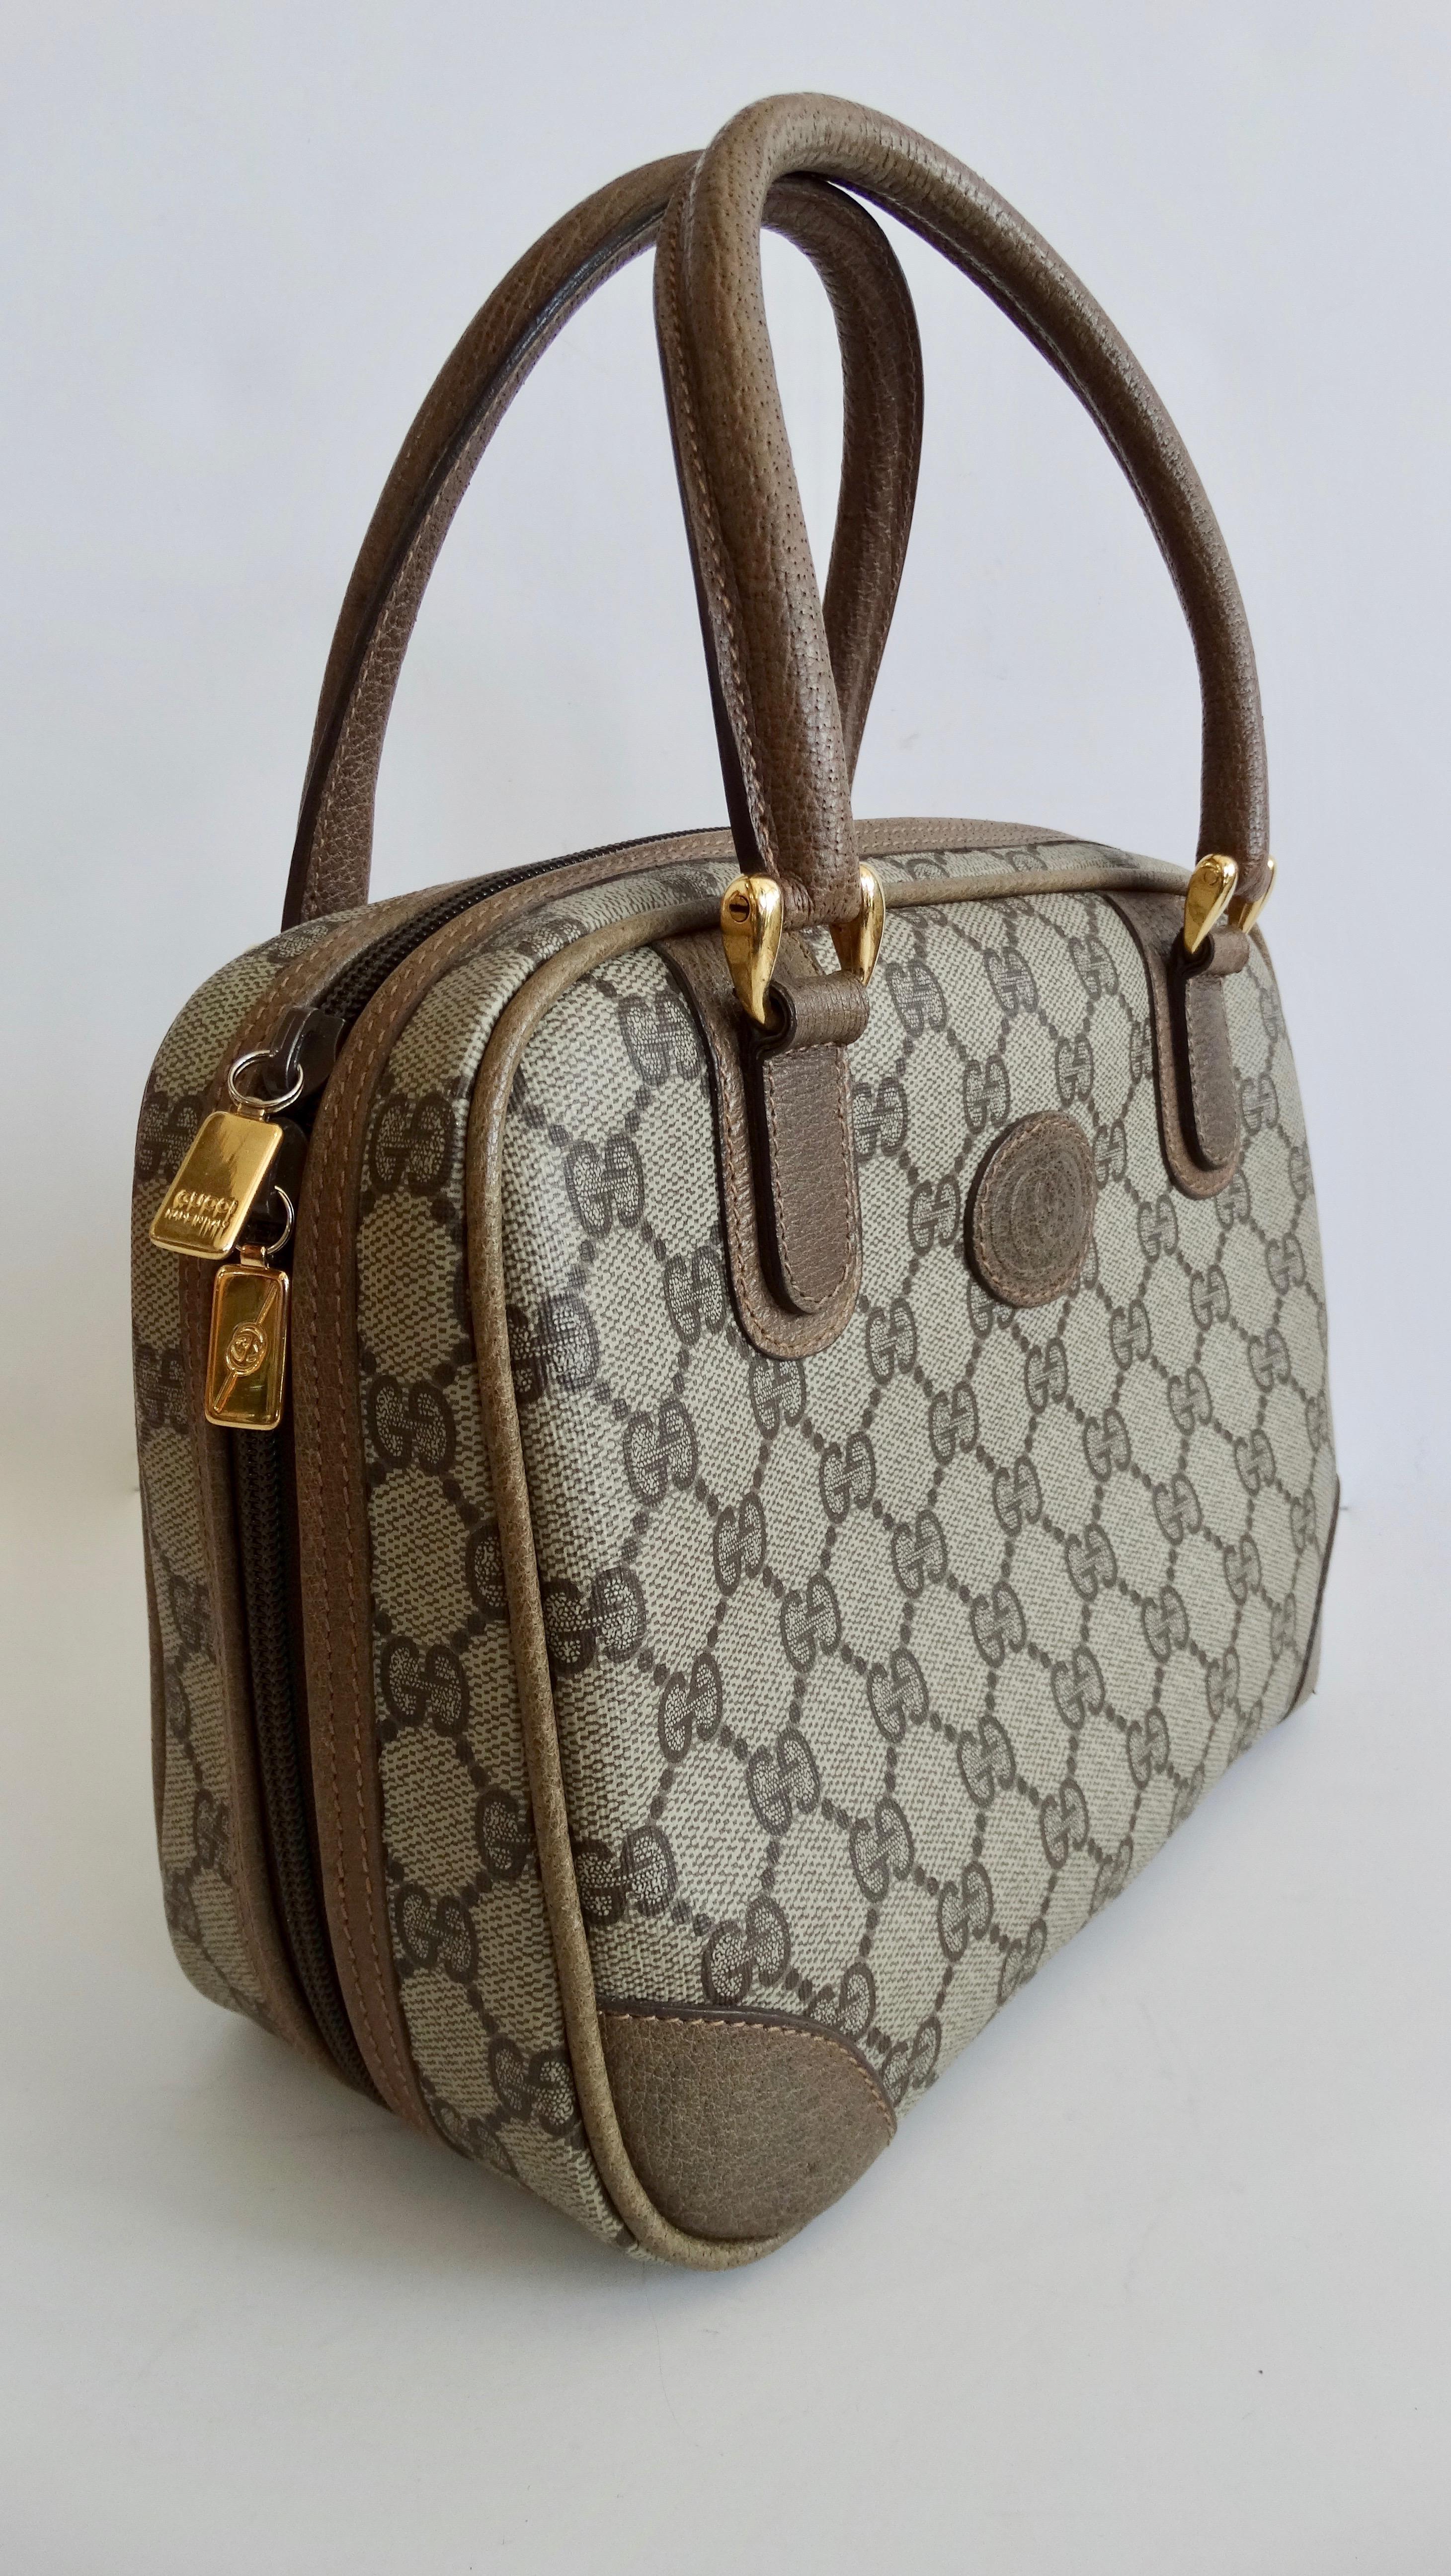 Calling all Gucci lovers! Your perfect everyday bag is here! Circa 1980s, this adorable Gucci handbag features the iconic Gucci monogram and gold plated hardware. Soft brown leather covers the dual top handles and exterior trim. Front face of bag